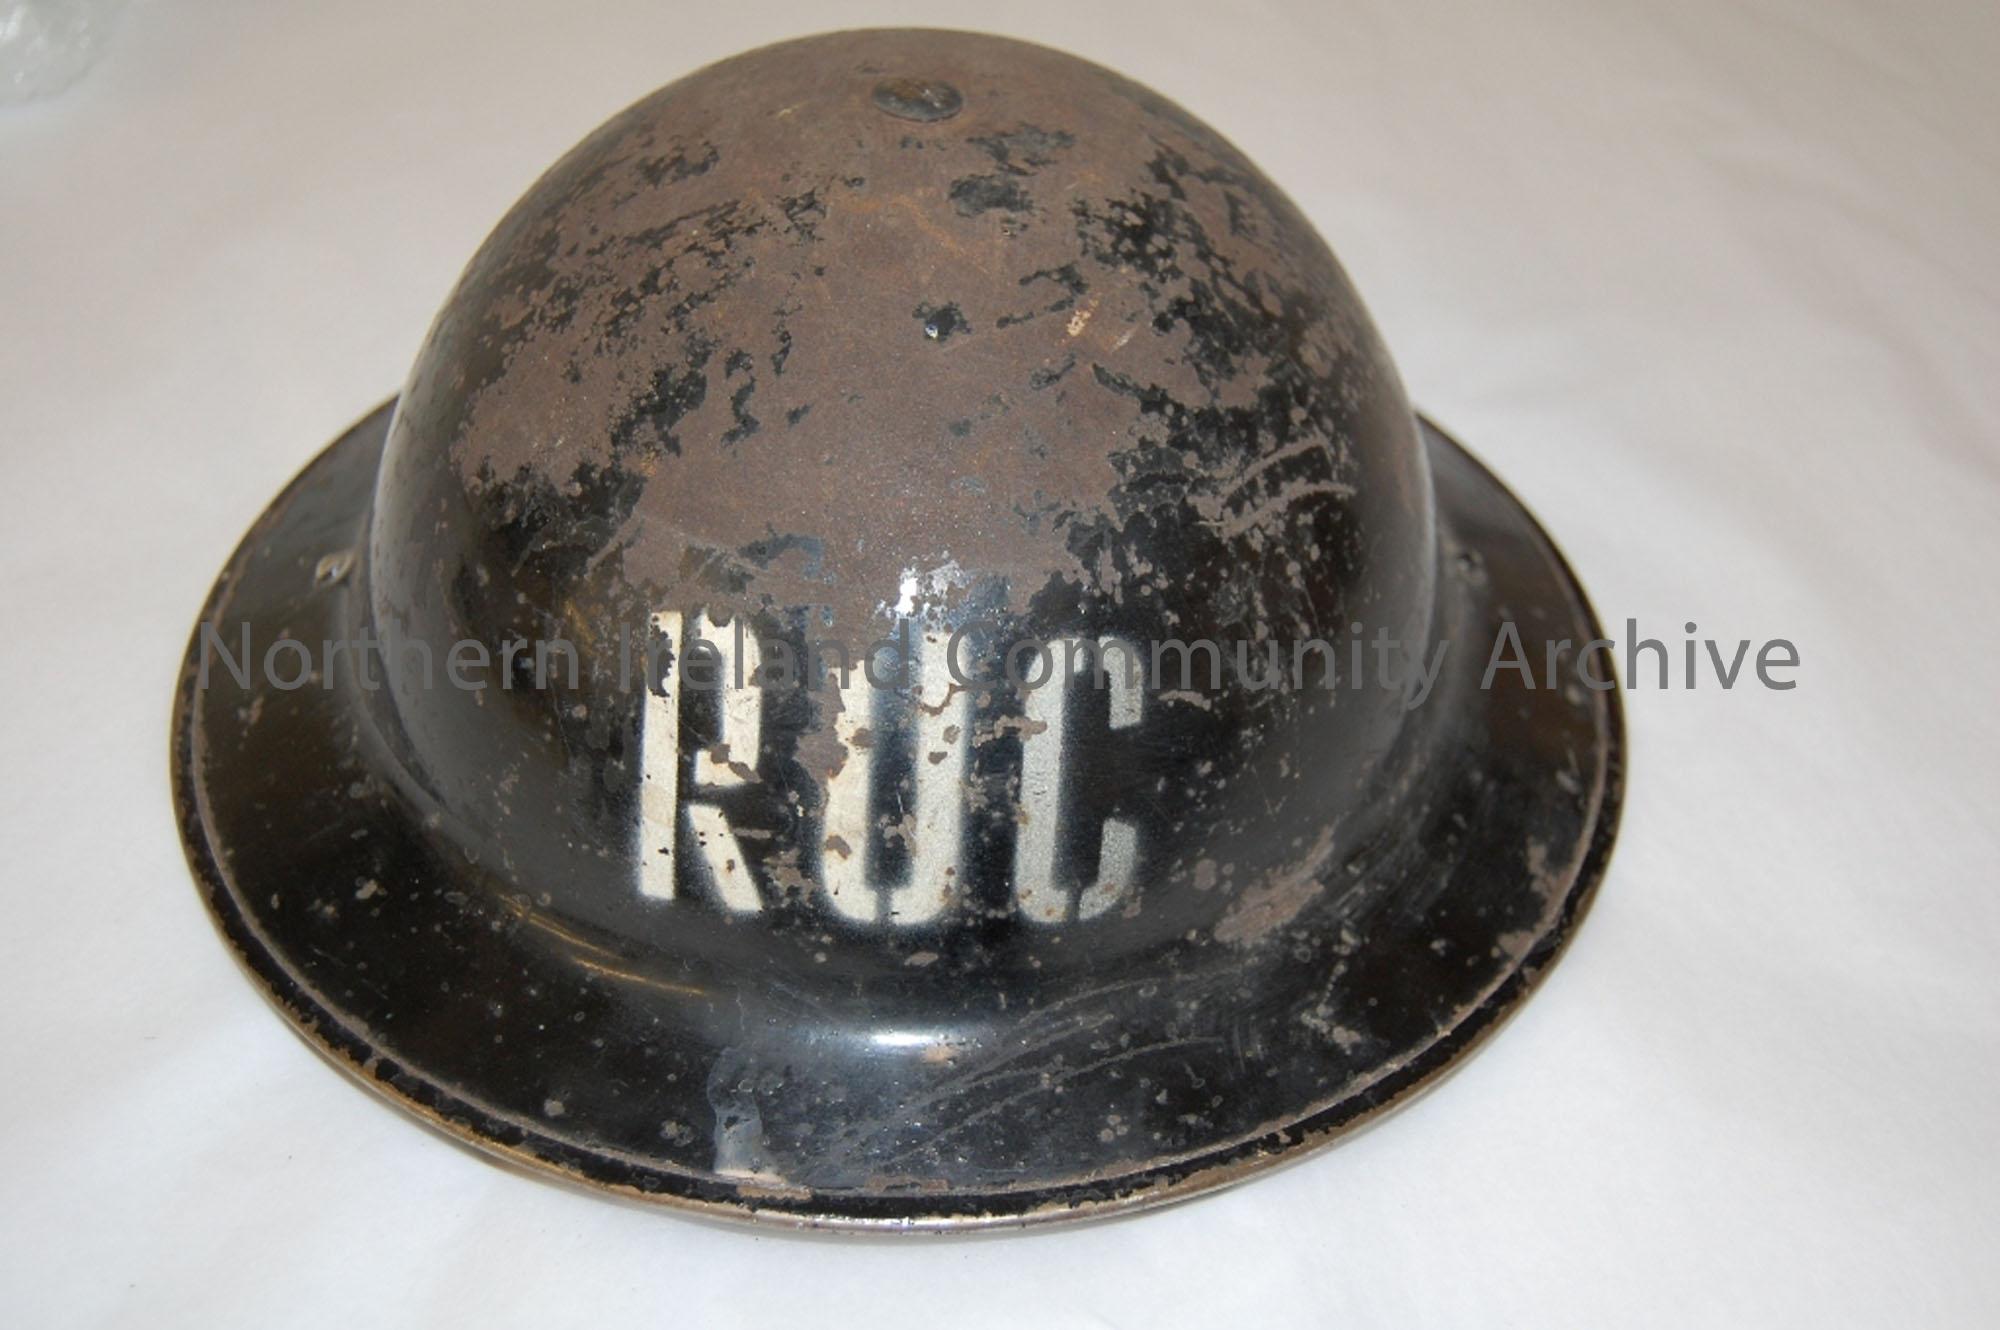 RUC circa 1940’s; Black with the letters ‘RUC’ painted on front. Inner padding still intact with strap. Some of black paint chipped off. See BHC:1998….